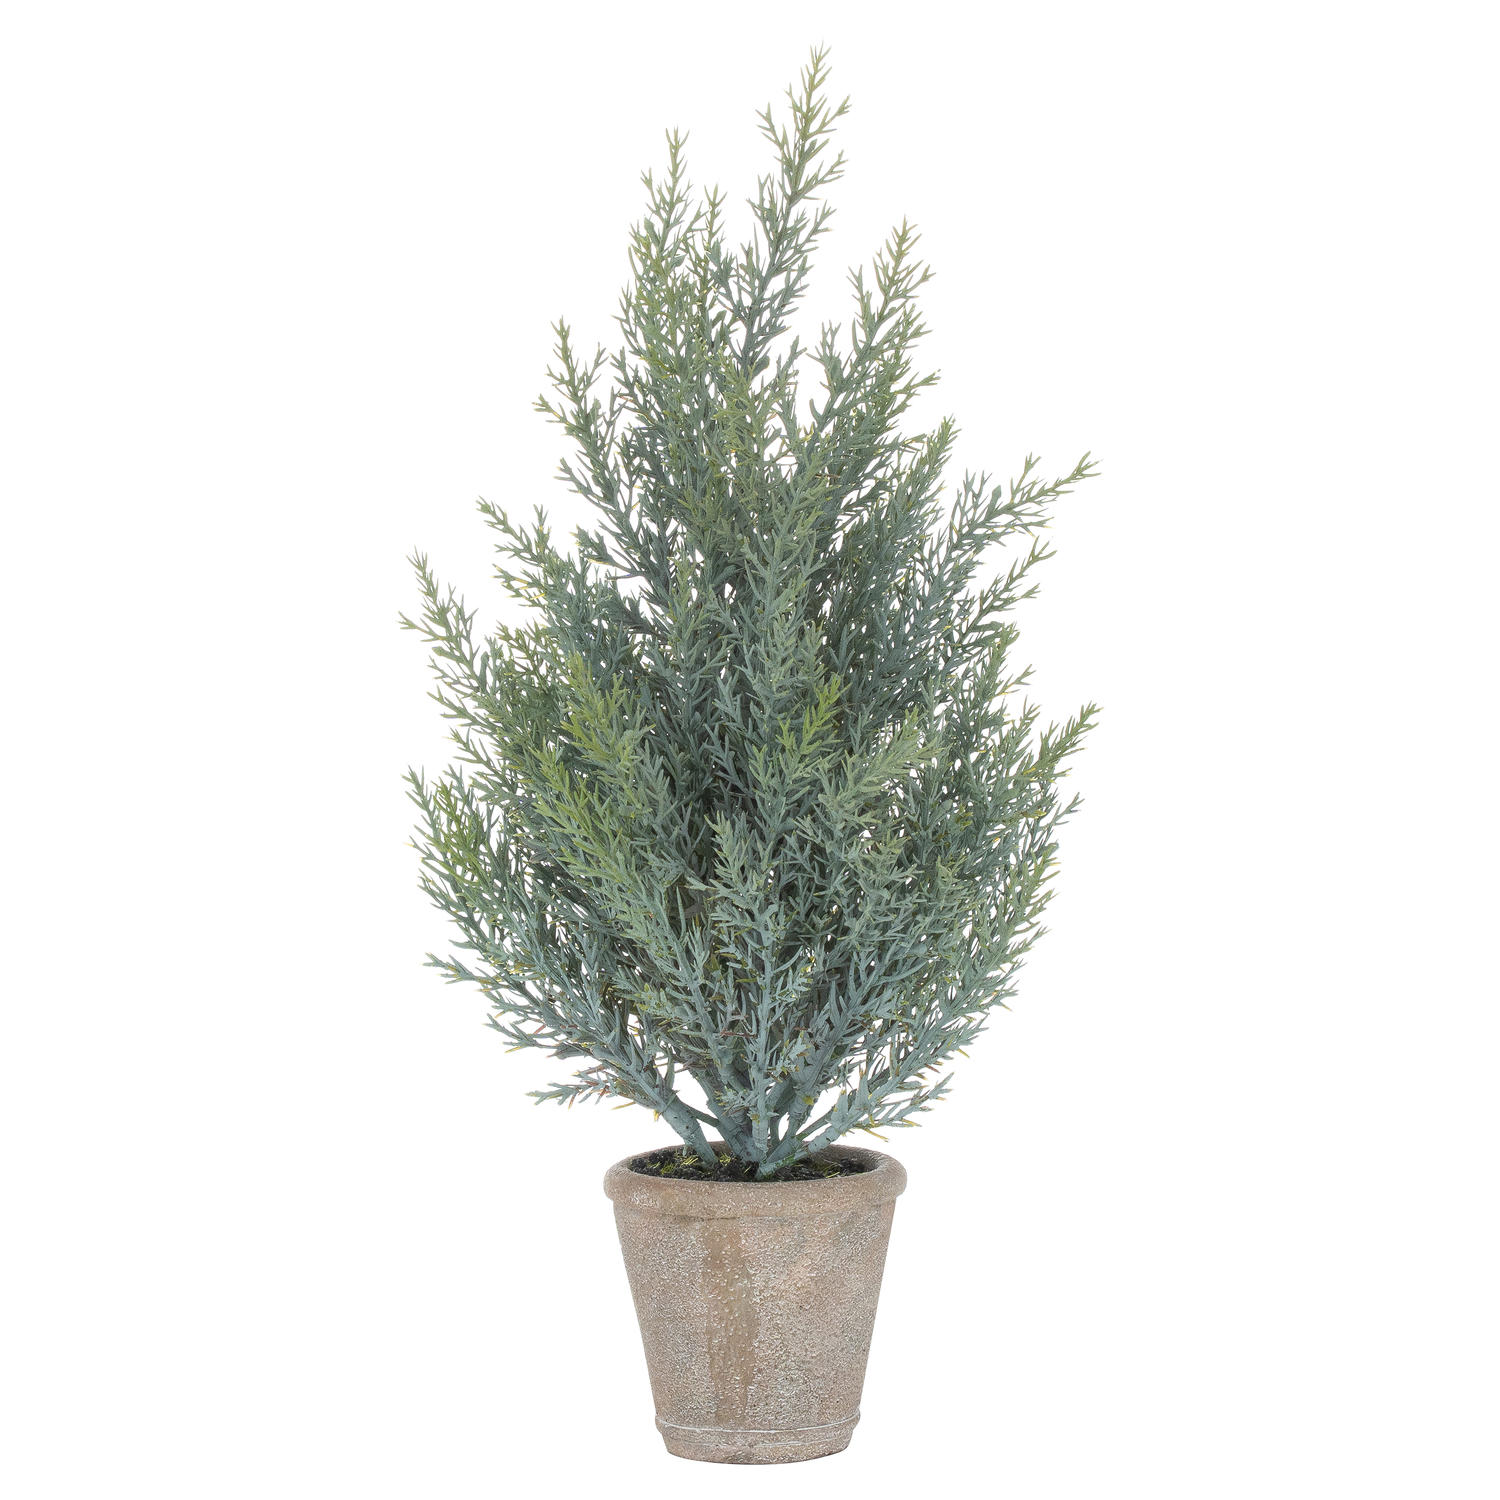 Squat Christmas Fir Tree In Stone Pot - Image 1